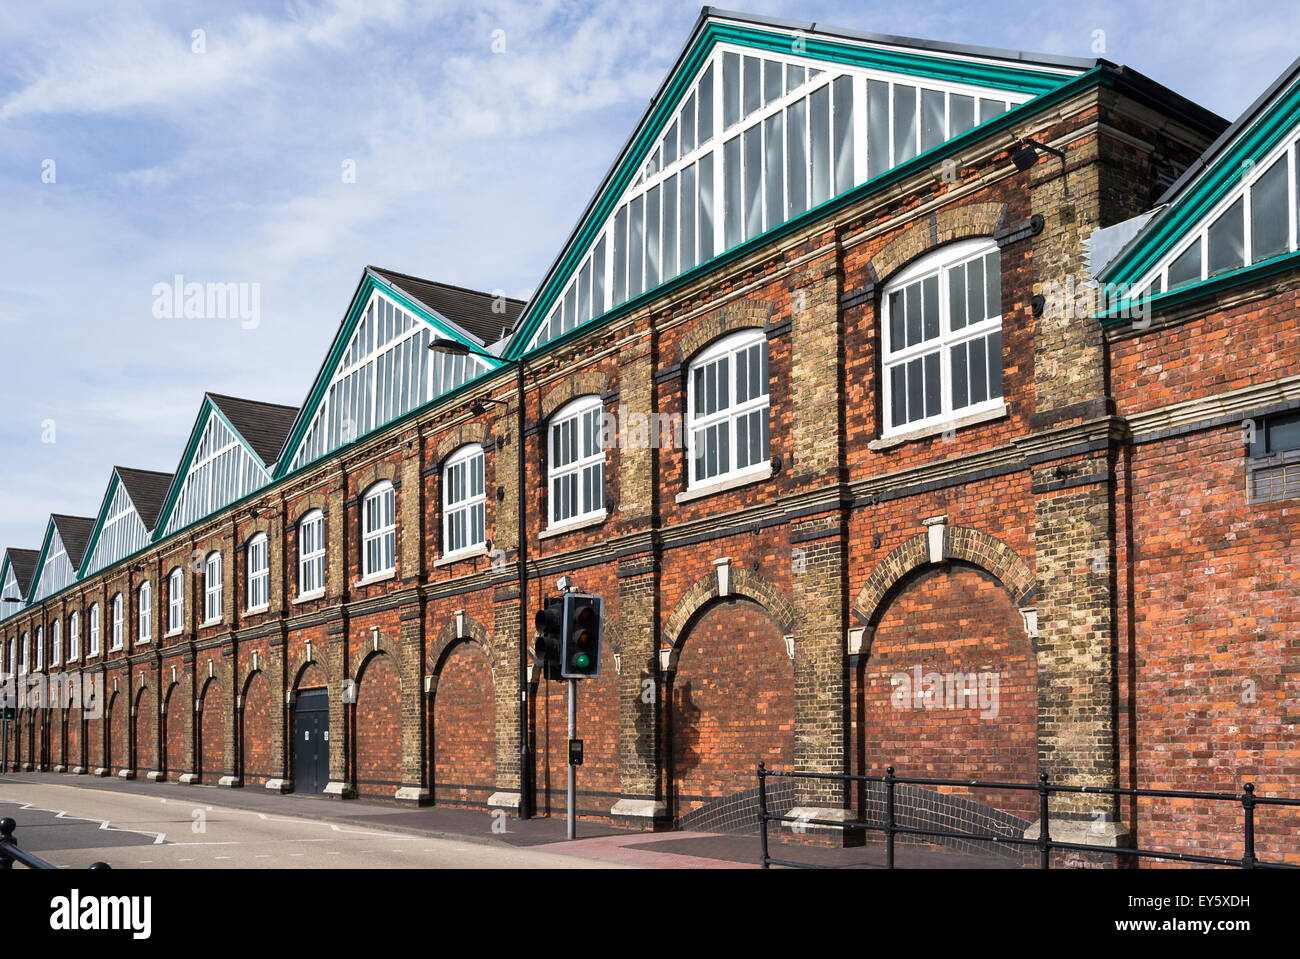 Former GWR railway engineering works in Swindon UK now a Designer Outlet Centre Stock Photo